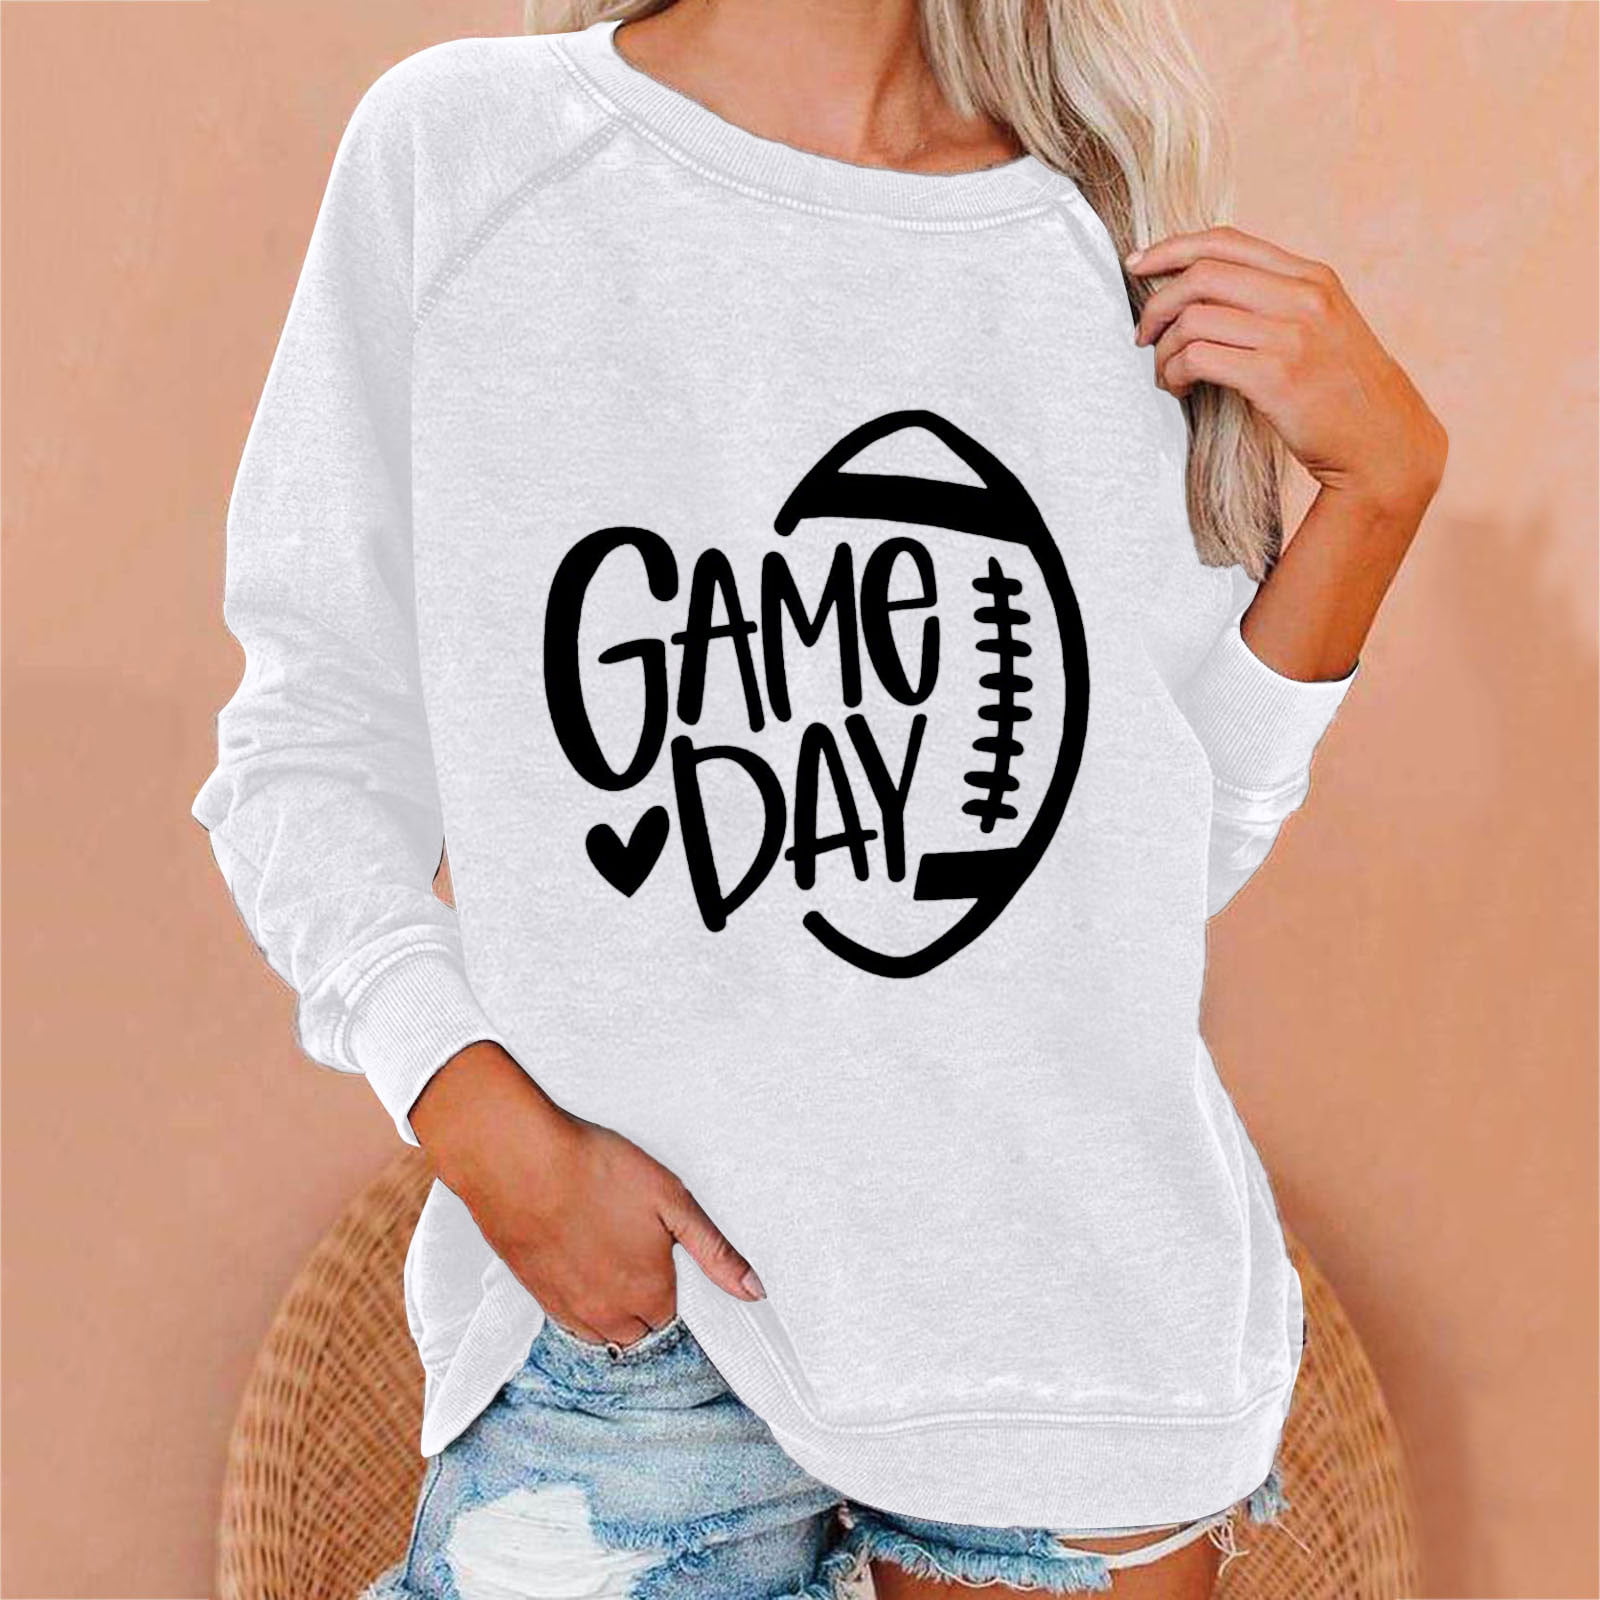 ZQGJB Baseball Game Day Sweatshirts for Women Plus Size Long Sleeve Graphic  T Shirts Loose Trendy Pullover Tops White S 